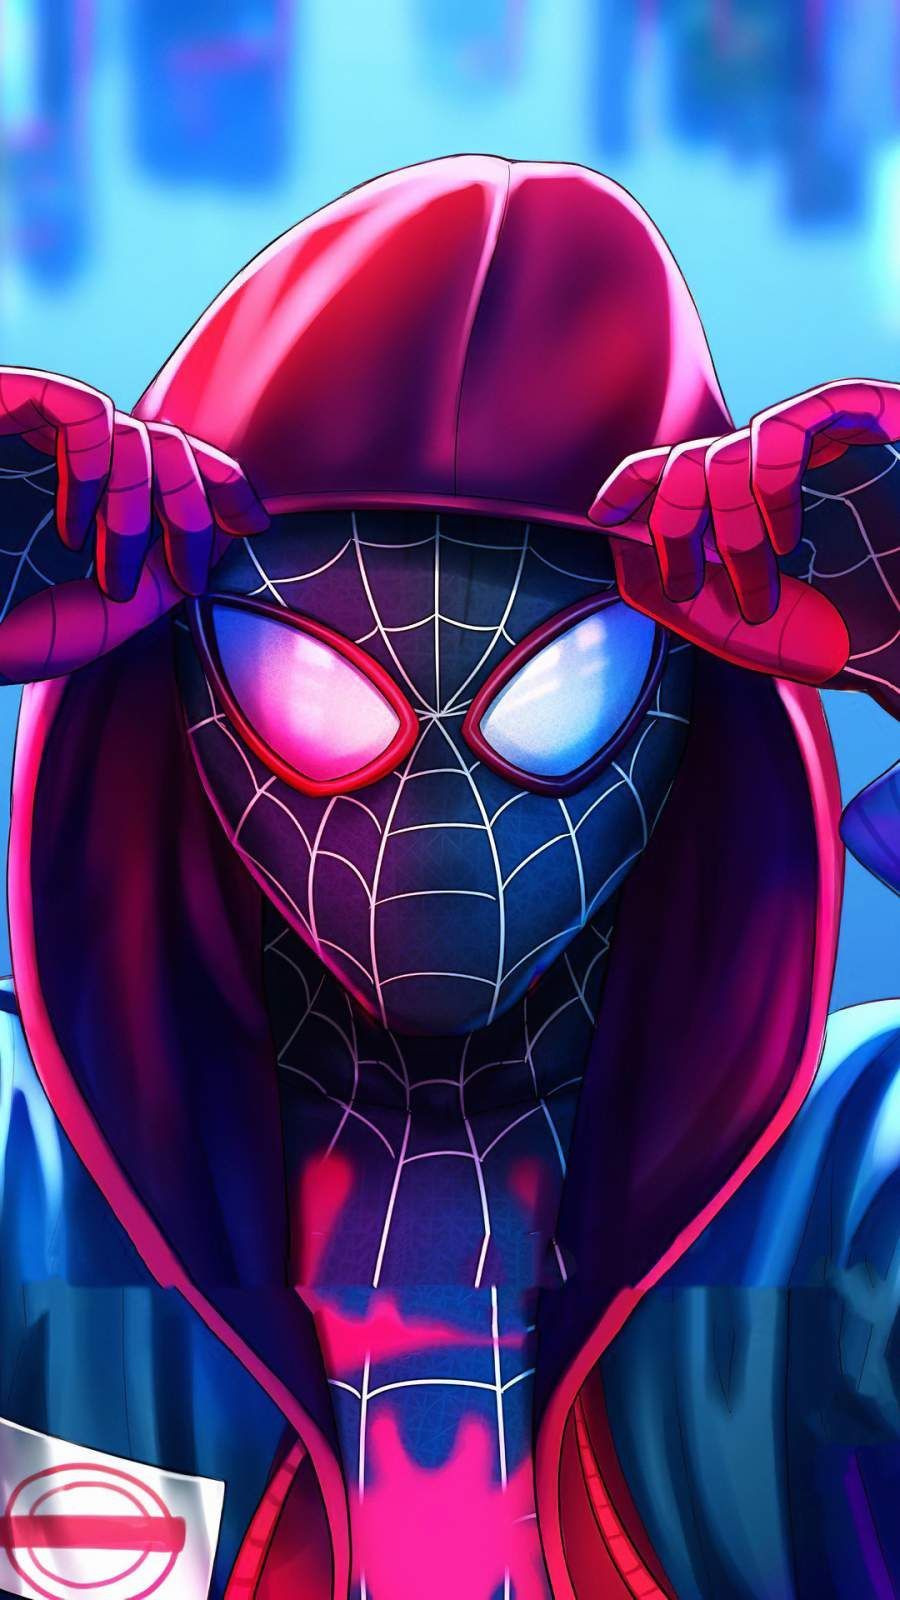 Download Miles Spiderman Hoodie Mobile Wallpaper For Your Android, IPhone Wallpaper Or IPad Tablet Wallpaper In 2020. Spiderman Artwork, Spiderman Art, Miles Spiderman